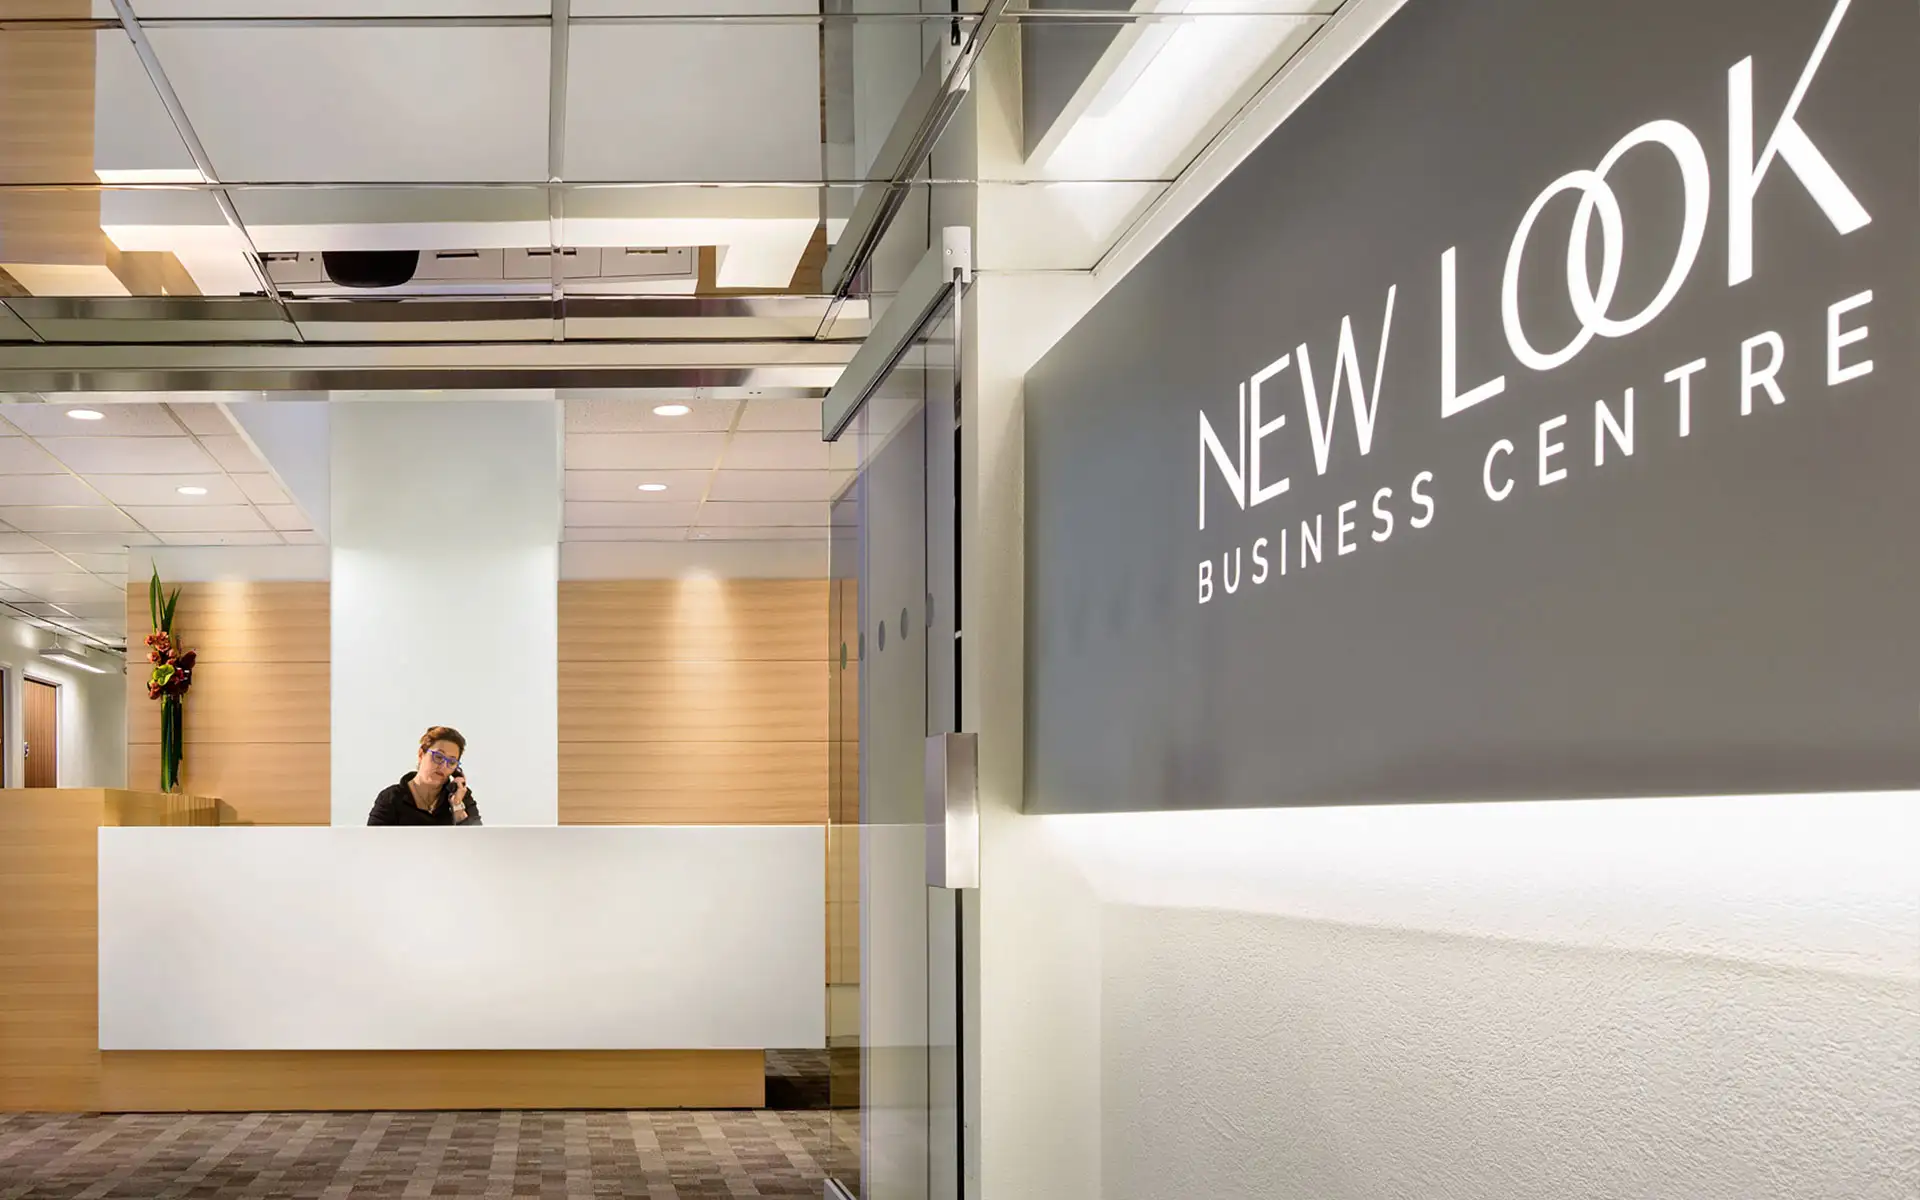 Office space Vancouver - New Look Business Centre offers professional executive offices for rent Vancouver BC, 100-1000 sqft, flexible lease, furnished...